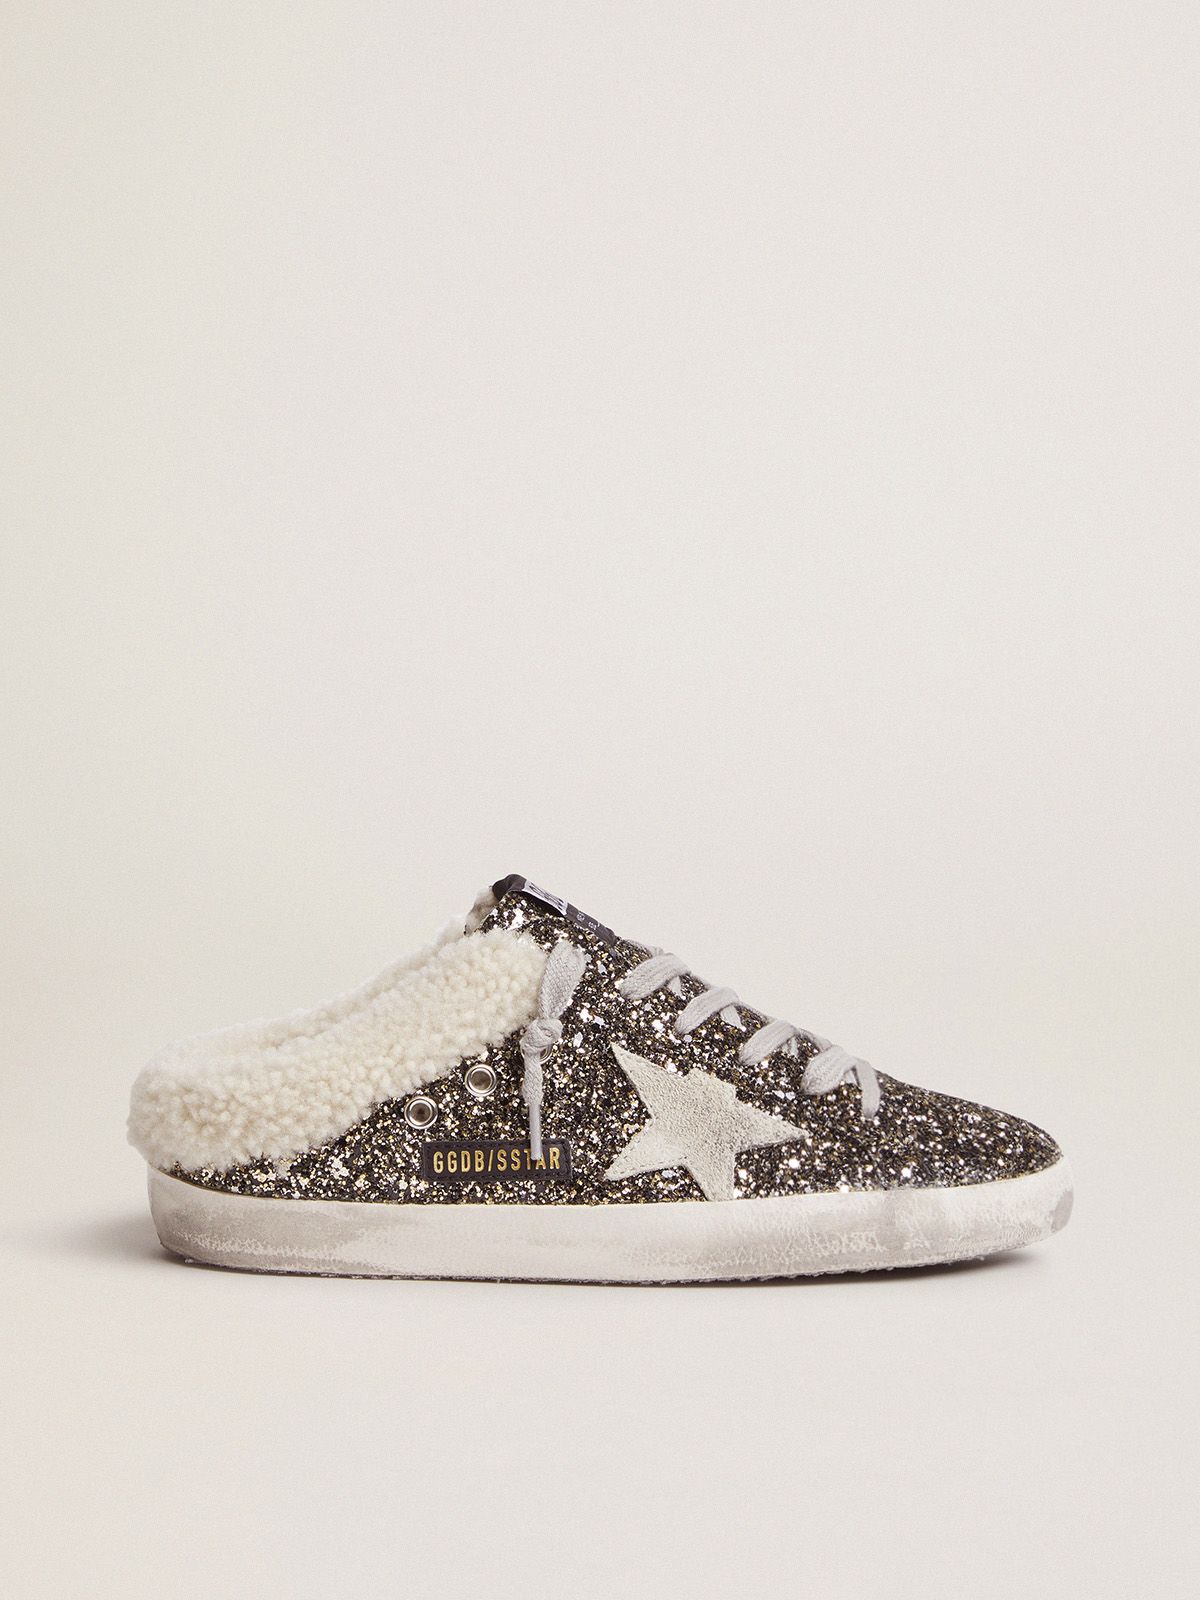 Golden Goose Stardan Super-Star sabot-style sneakers with glitter and shearling lining